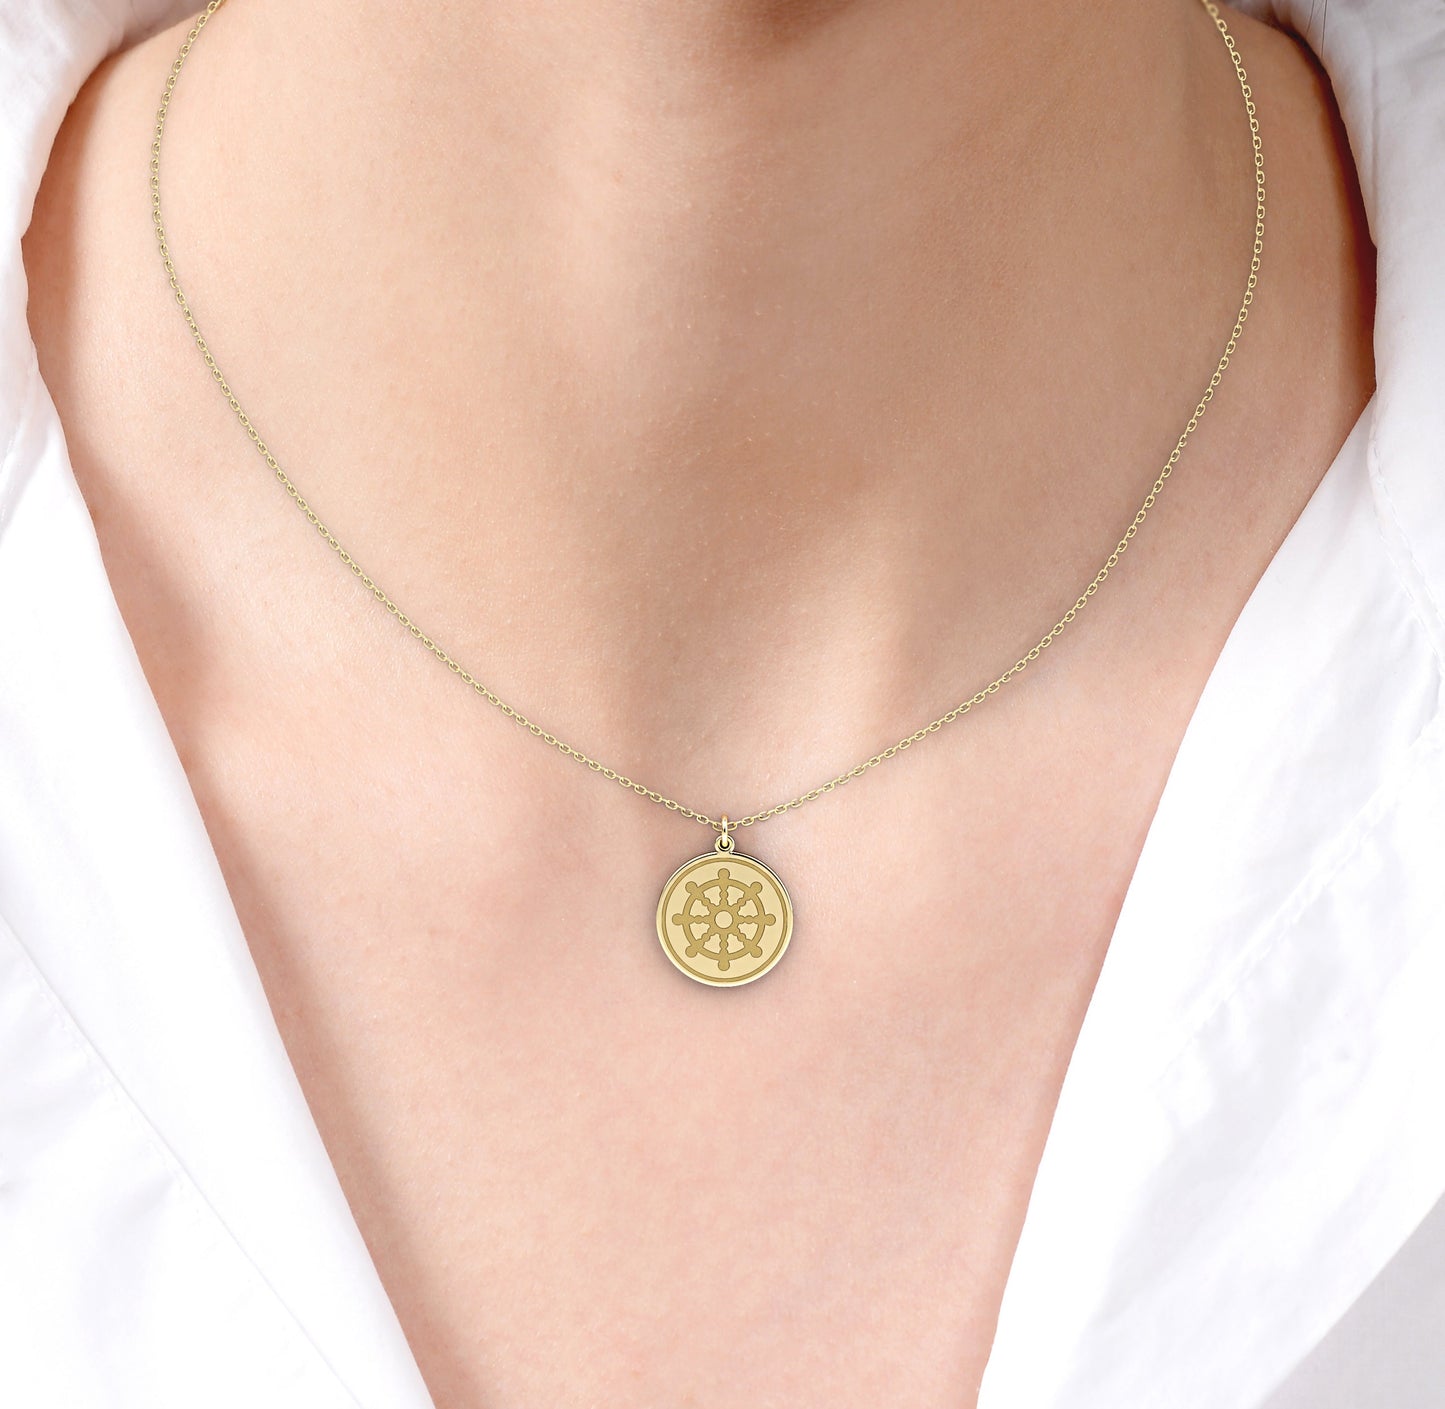 Gold Dharmachakra Necklace